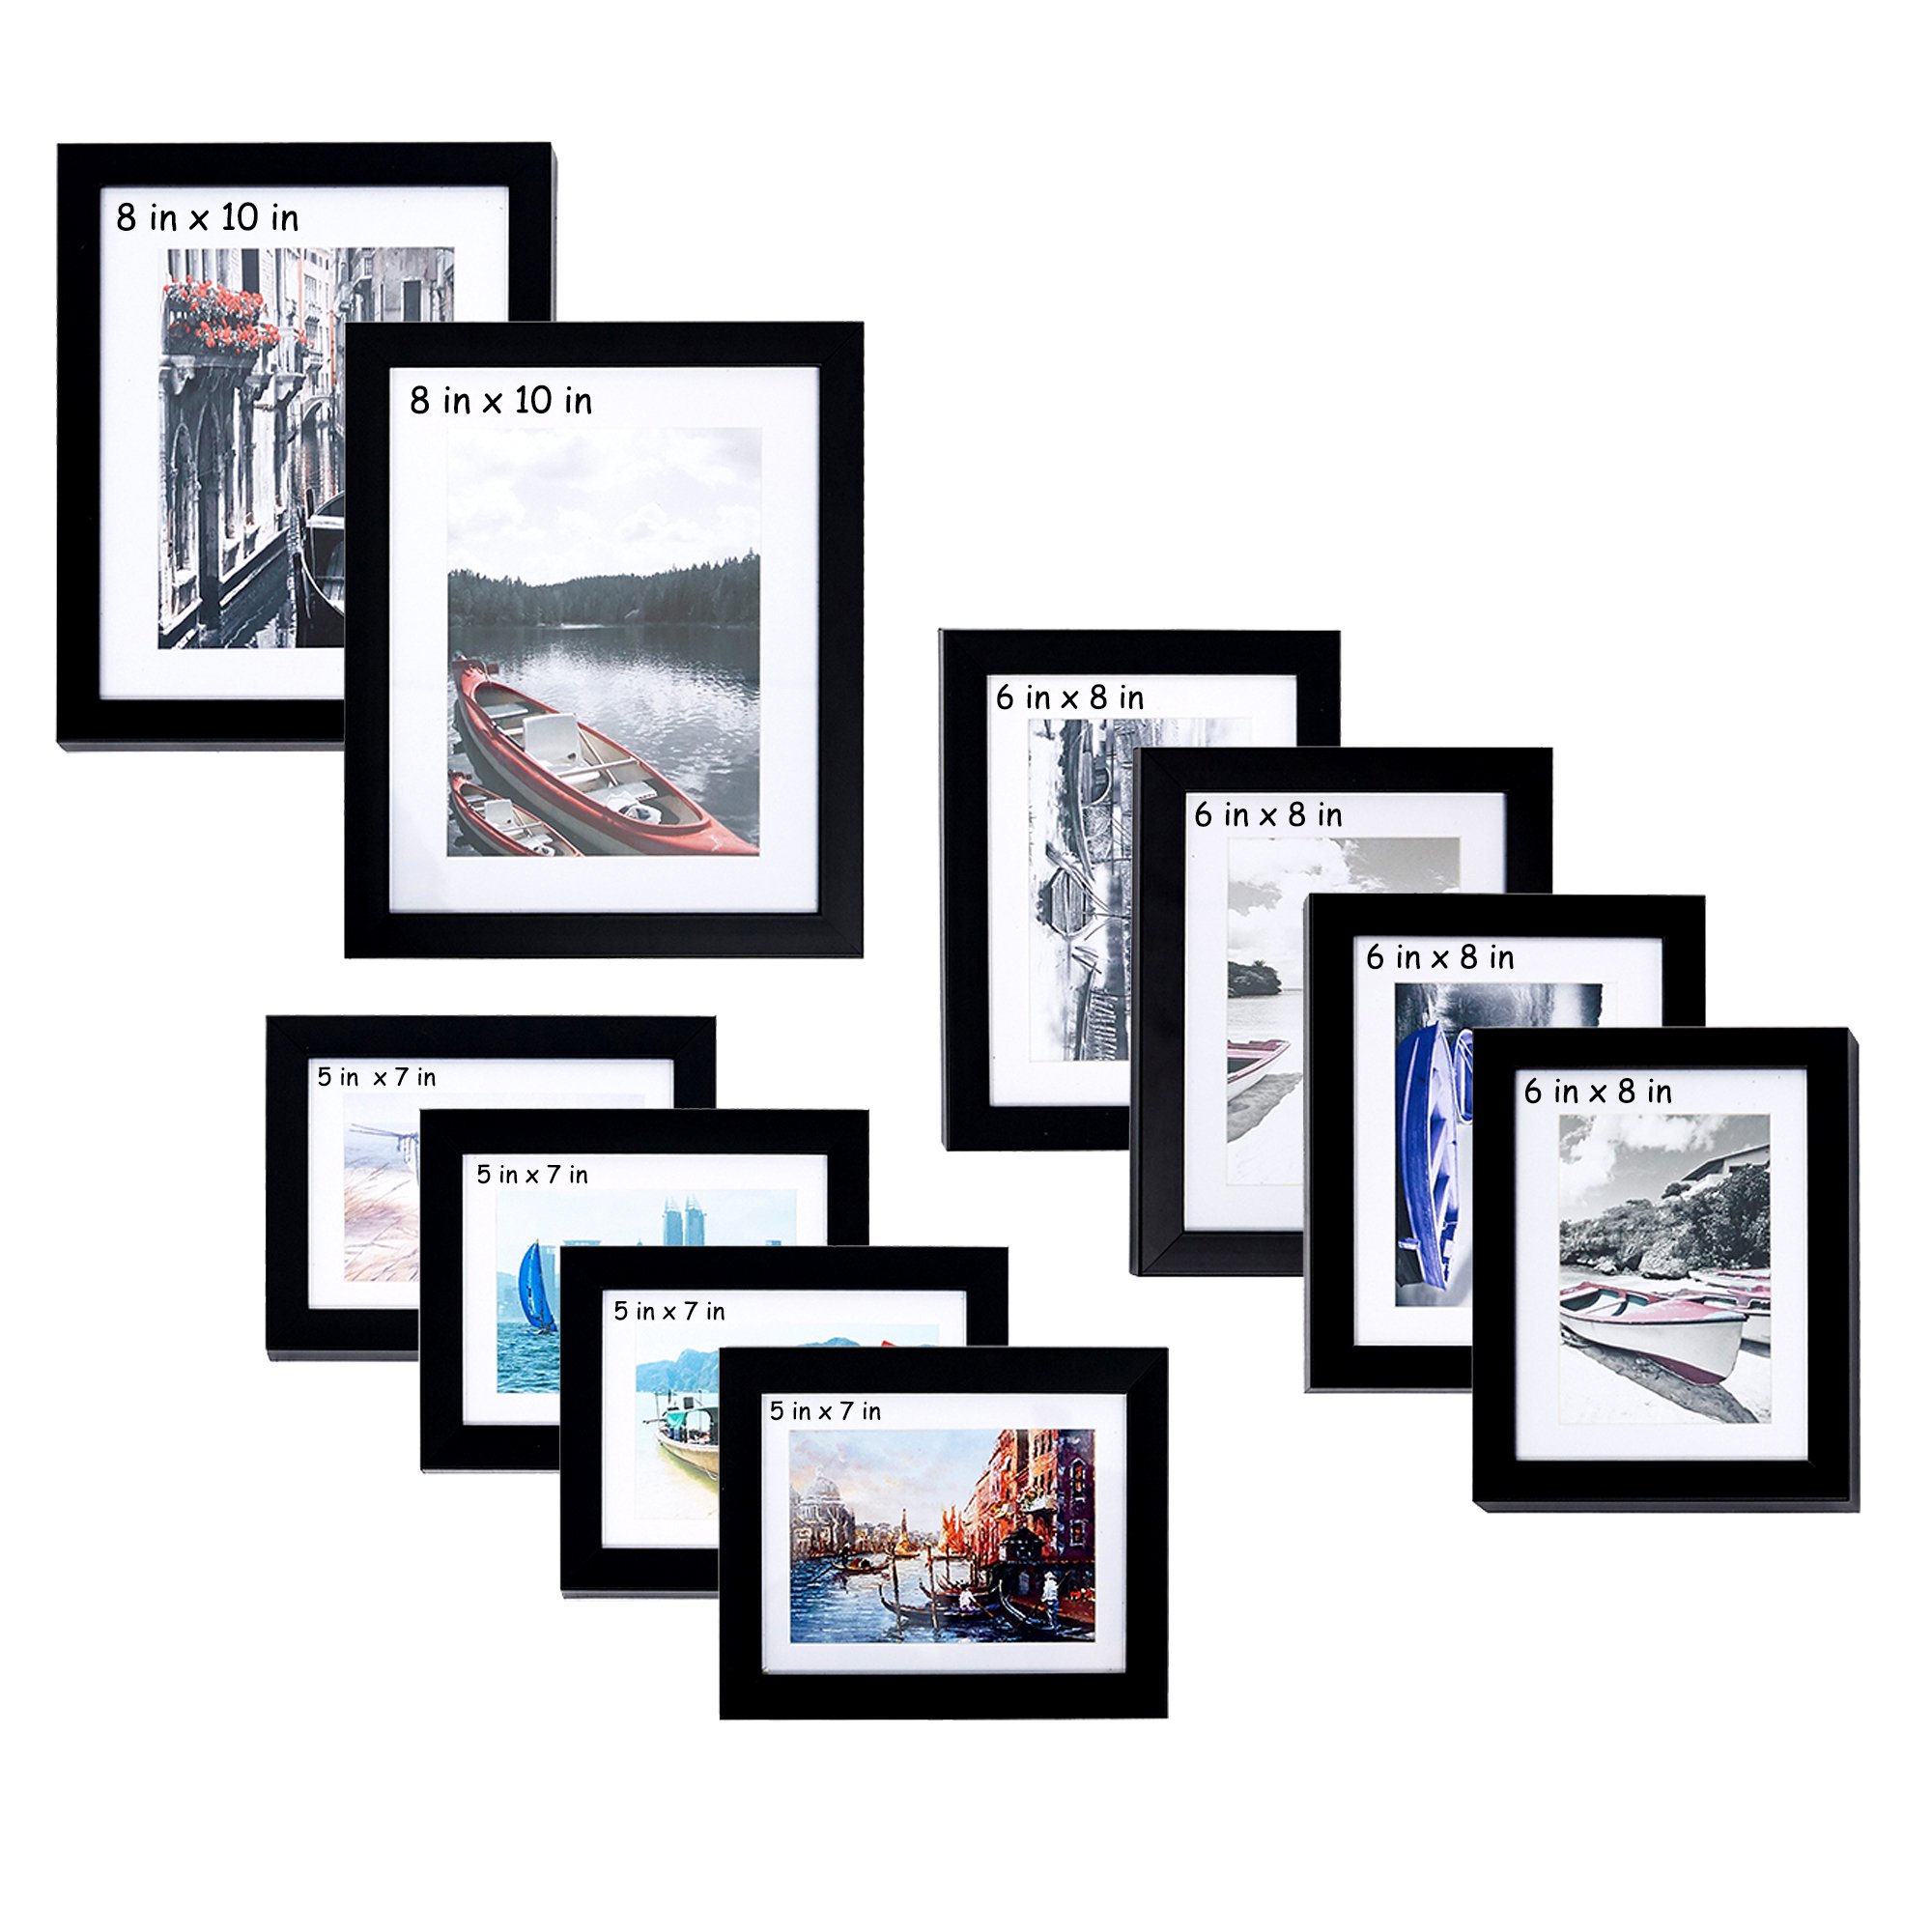 KARMAS PRODUCT 10 Pieces Picture Frame Sets for Wall Gallery-2 pcs 8x10 in,  4 pcs 6x8 in, 4 pcs 5x7 in, Black